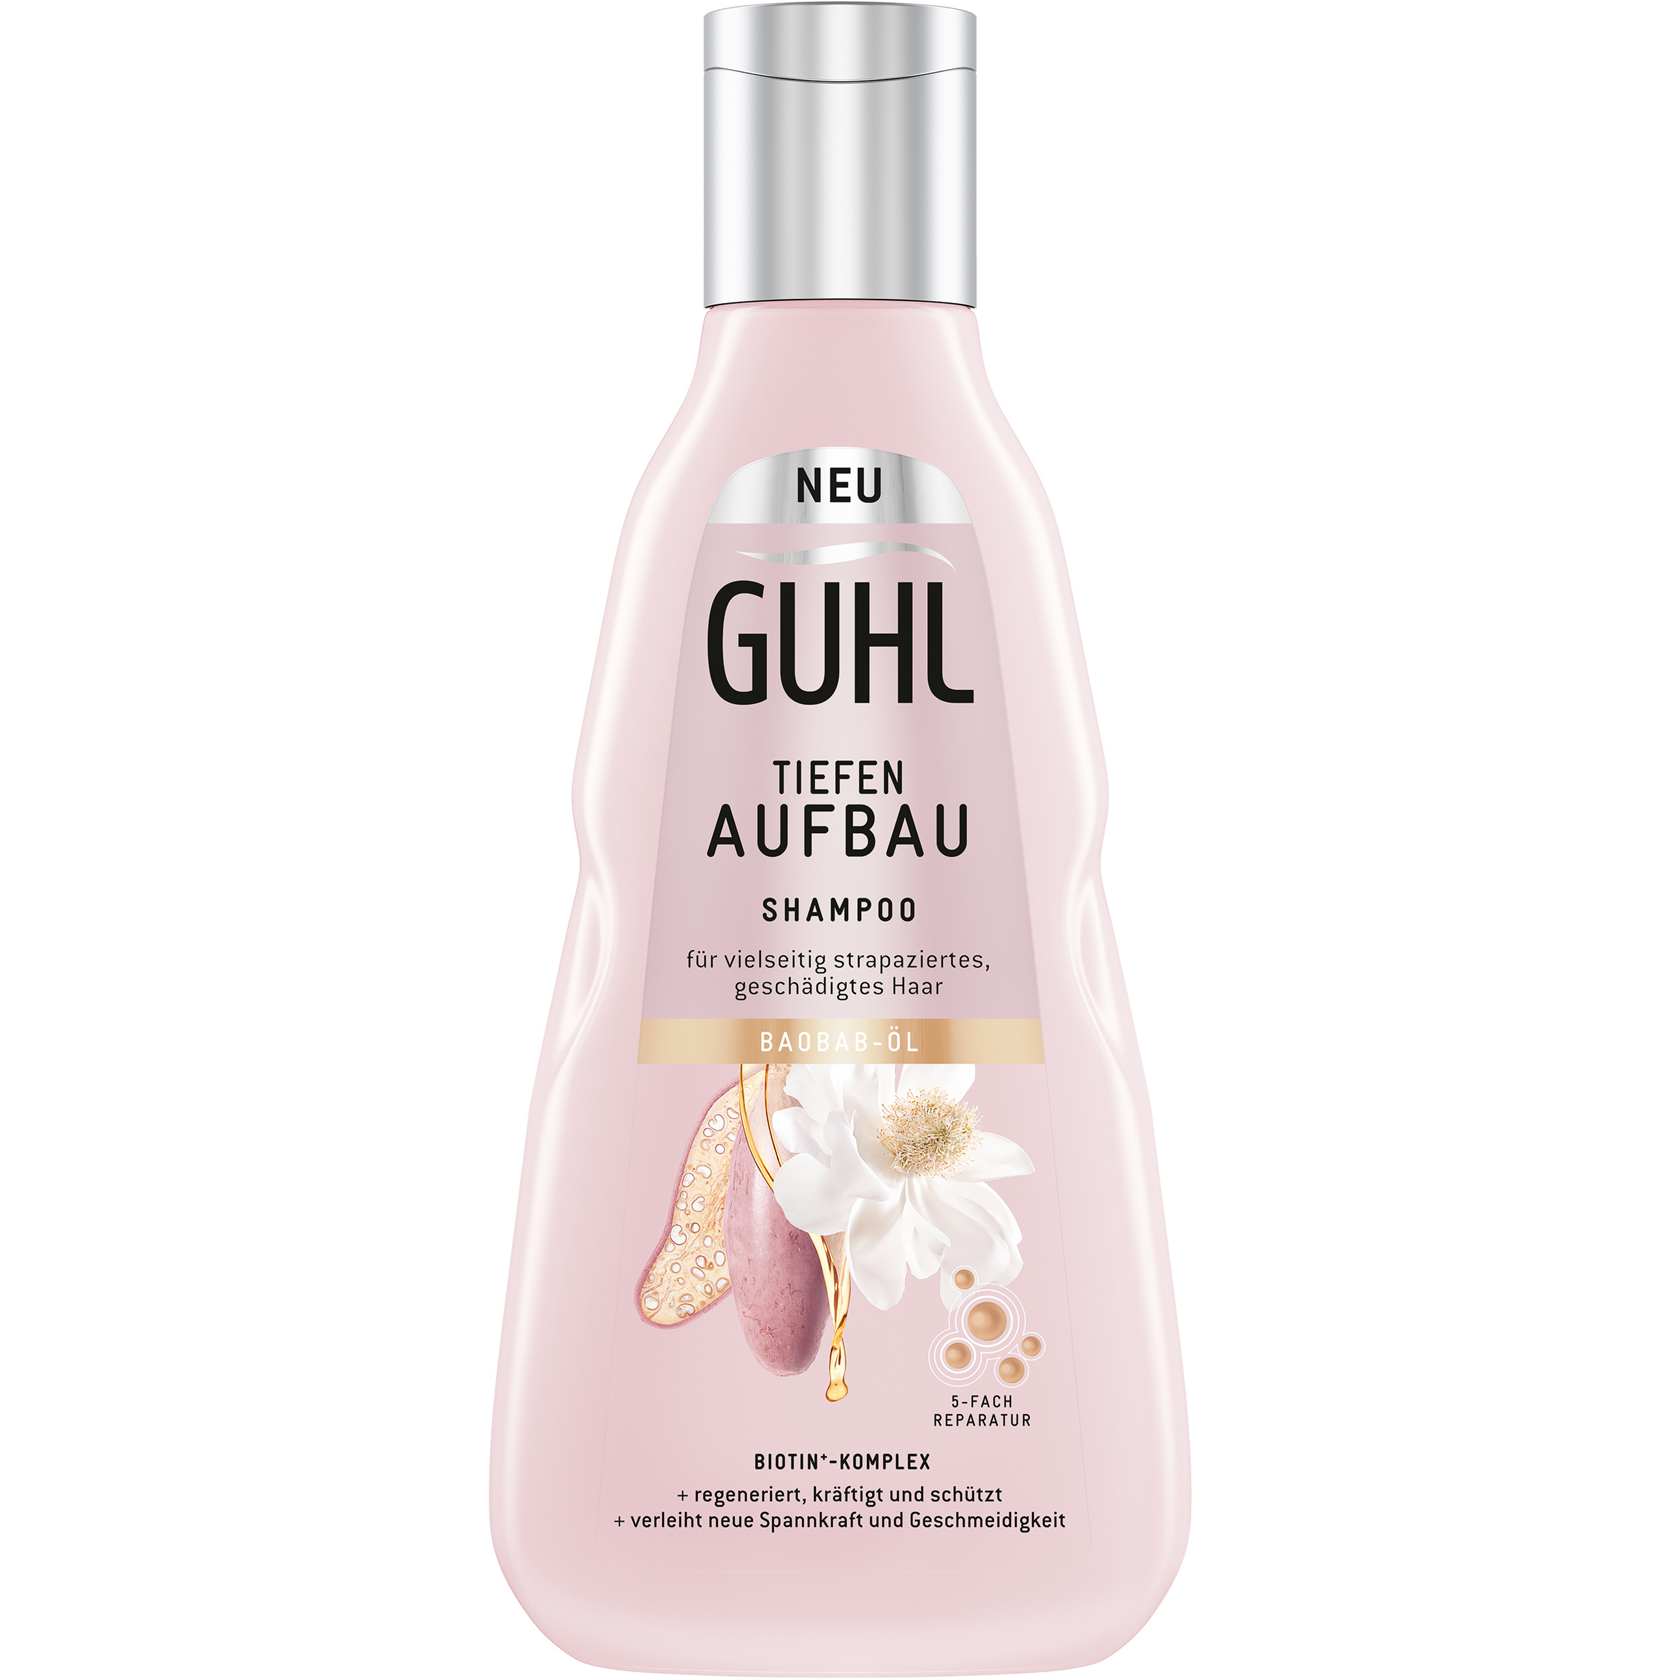 Kao Kao Launches Sustainable Packaging With Its Traditional Haircare Brand Guhl In Europe